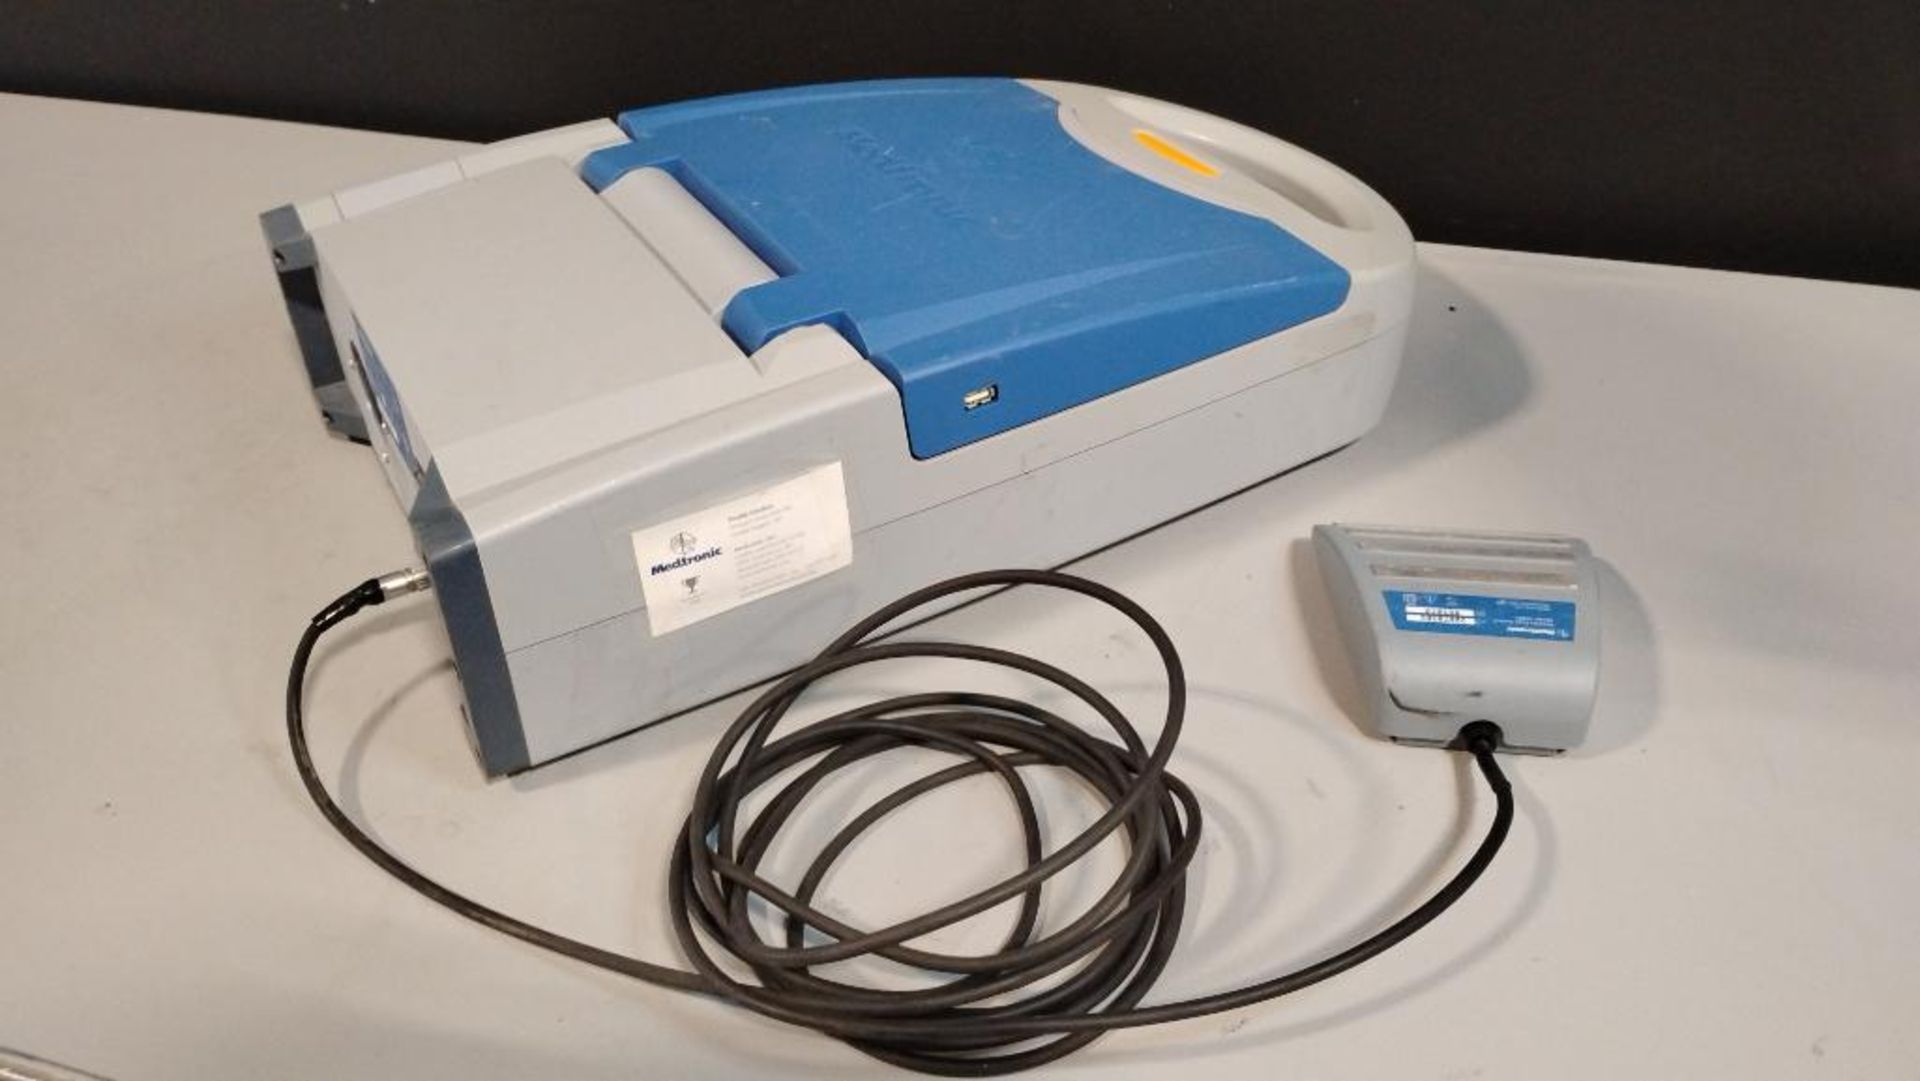 MEDTRONIC CARDIOBLATE 68000 SURGICAL ABLATION SYSTEM WITH FOOTSWITCH - Image 5 of 5